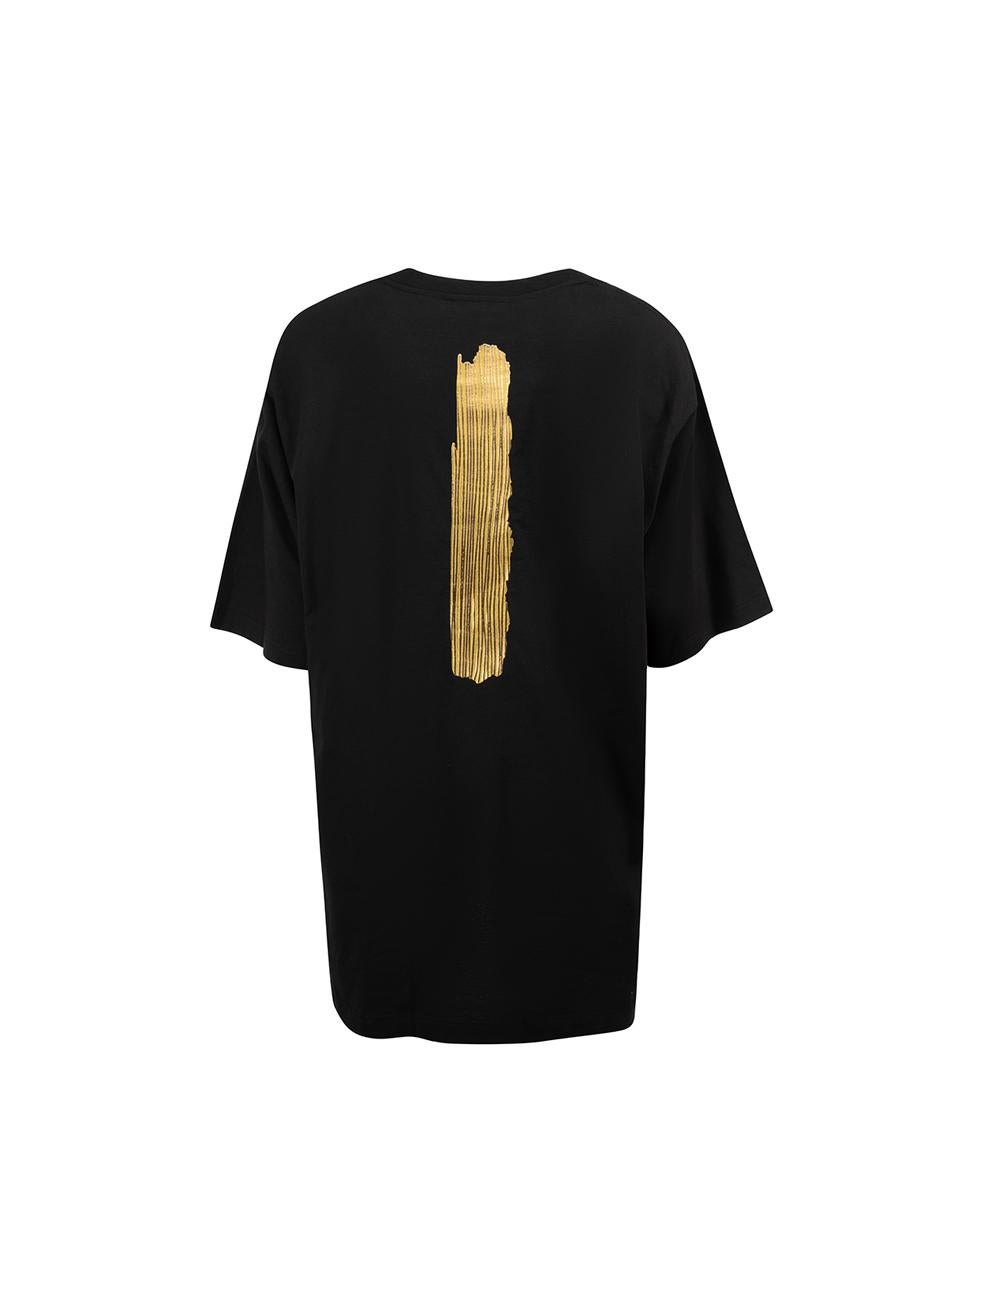 CONDITION is Never worn, with tags. No visible wear to t-shirt is evident on this new Dolce & Gabbana designer resale item.

Details
Unisex
Black
Cotton
Short sleeves t-shirt
Oversized fit
Round neckline
Gold tone Realtà Parallela print
Made in